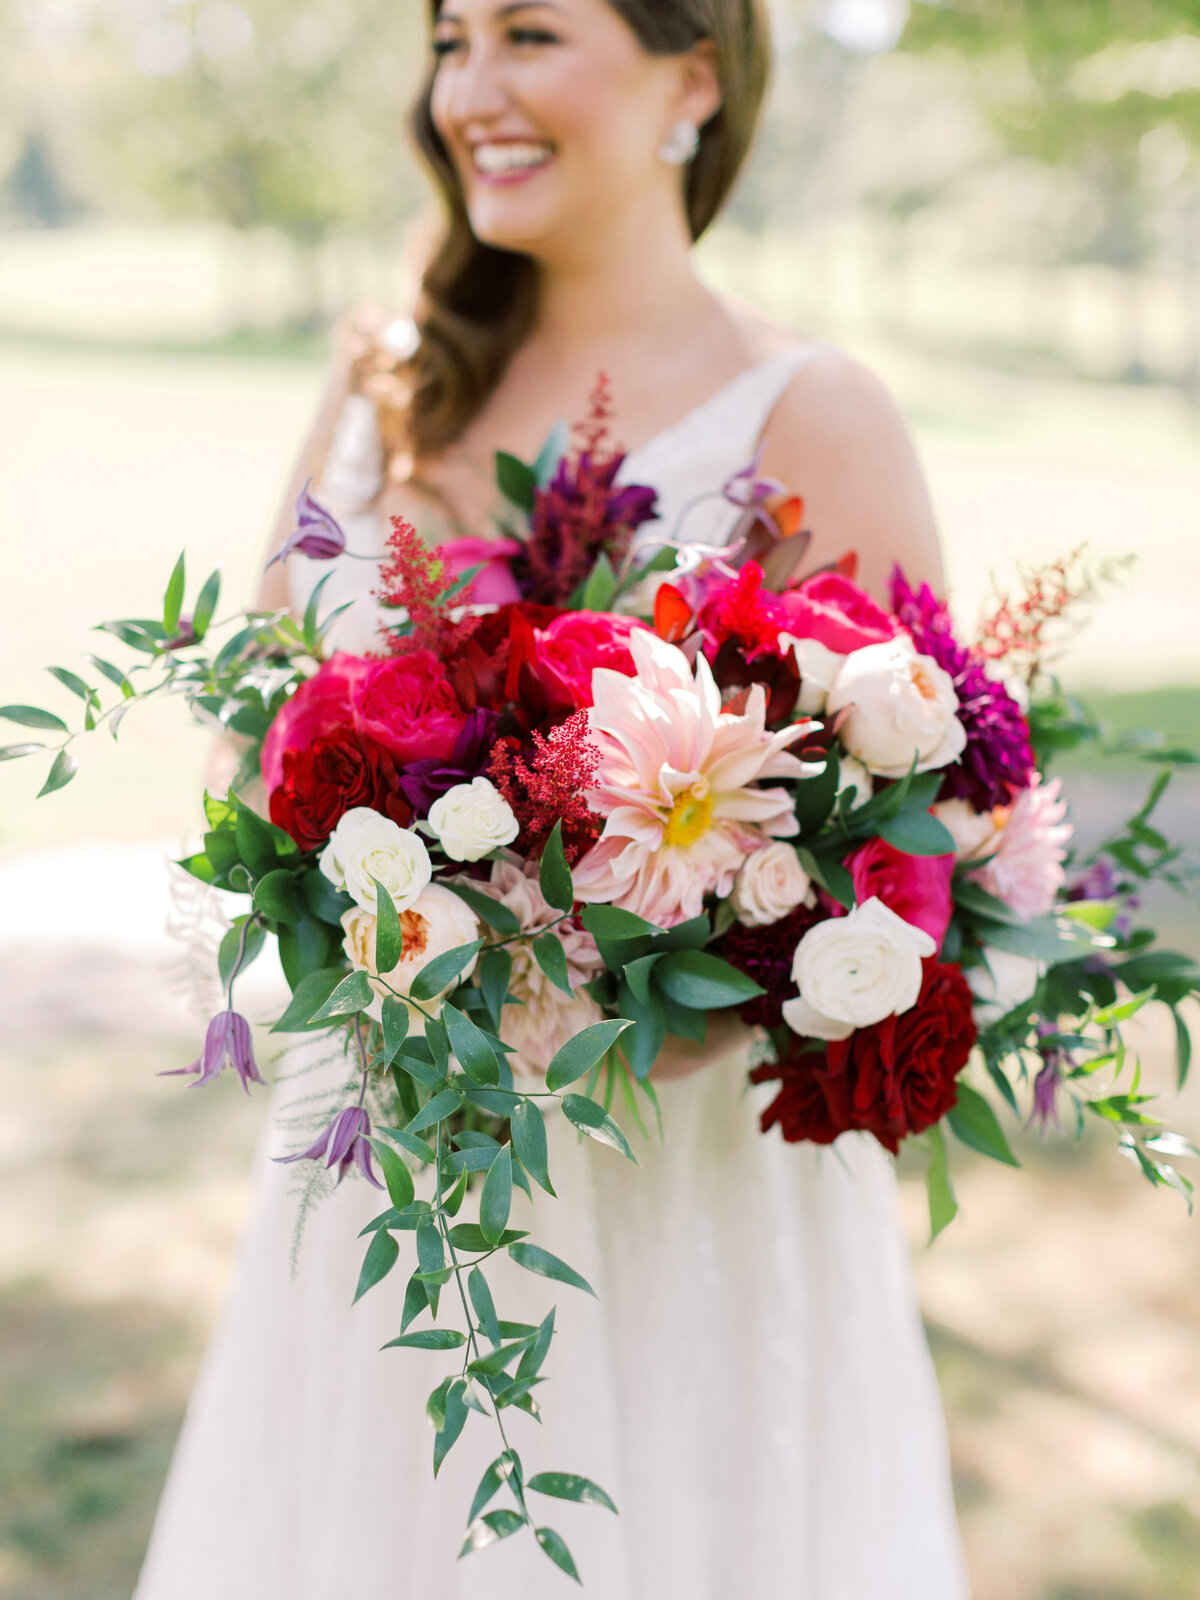 Hot pink, burgundy, pink and white large bridal bouquet with bride in Fairfax, VA